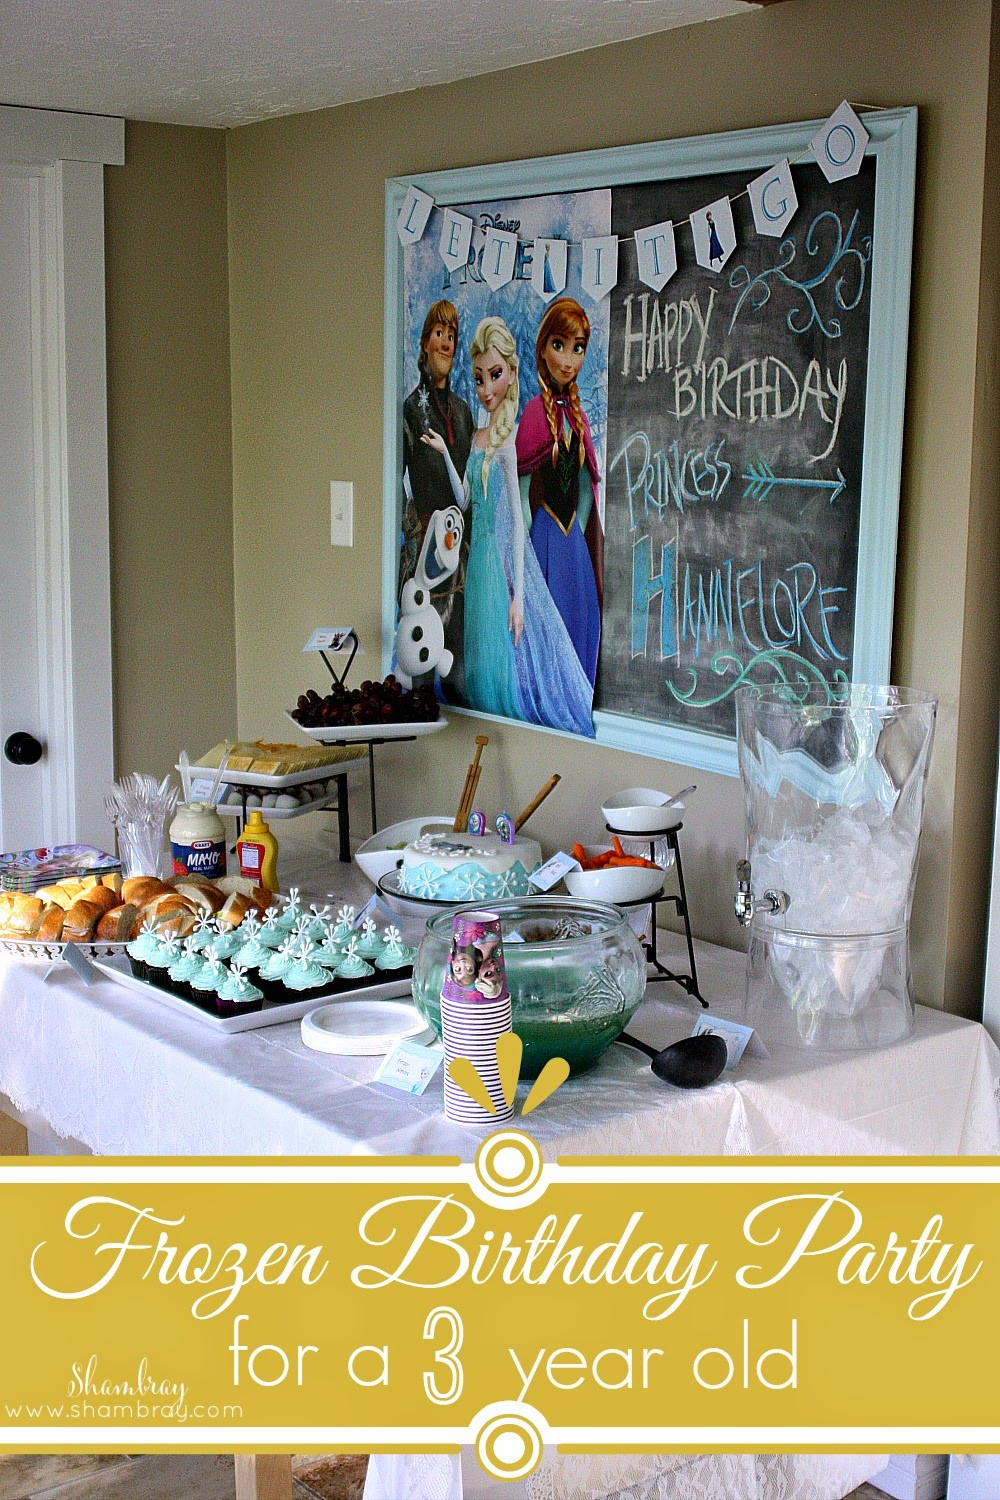 Ideas For 3 Year Old Birthday Party
 Shambray A Frozen Birthday Party for a 3 year old